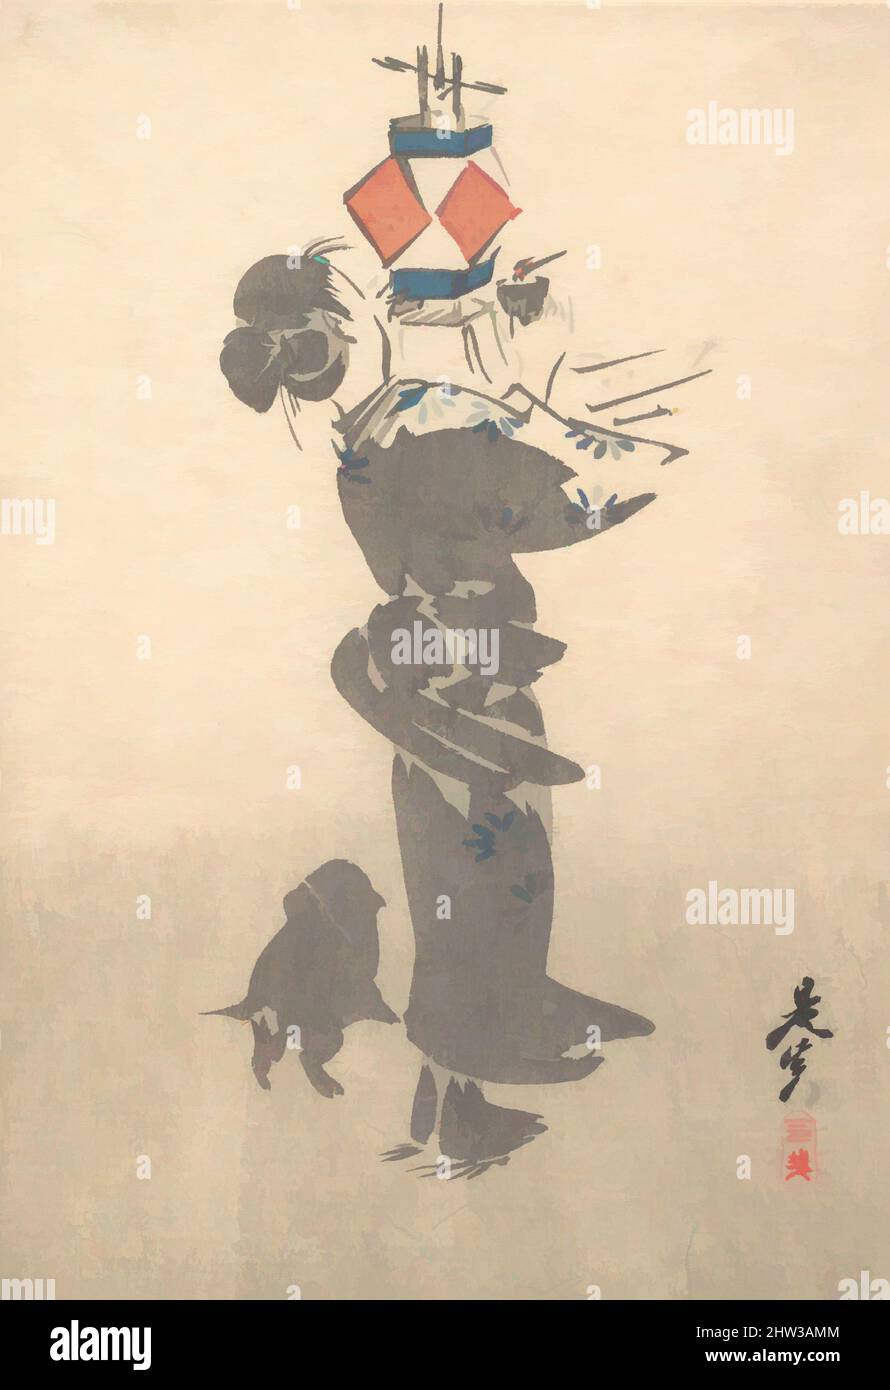 Art inspired by Lighting a Hanging Lantern for the Obon Festival, Edo period (1615–1868), 1860, Japan, Polychrome woodblock print; ink and color on paper, 9 1/8 x 6 3/8 in. (23.2 x 16.2 cm), Prints, Shibata Zeshin (Japanese, 1807–1891, Classic works modernized by Artotop with a splash of modernity. Shapes, color and value, eye-catching visual impact on art. Emotions through freedom of artworks in a contemporary way. A timeless message pursuing a wildly creative new direction. Artists turning to the digital medium and creating the Artotop NFT Stock Photo